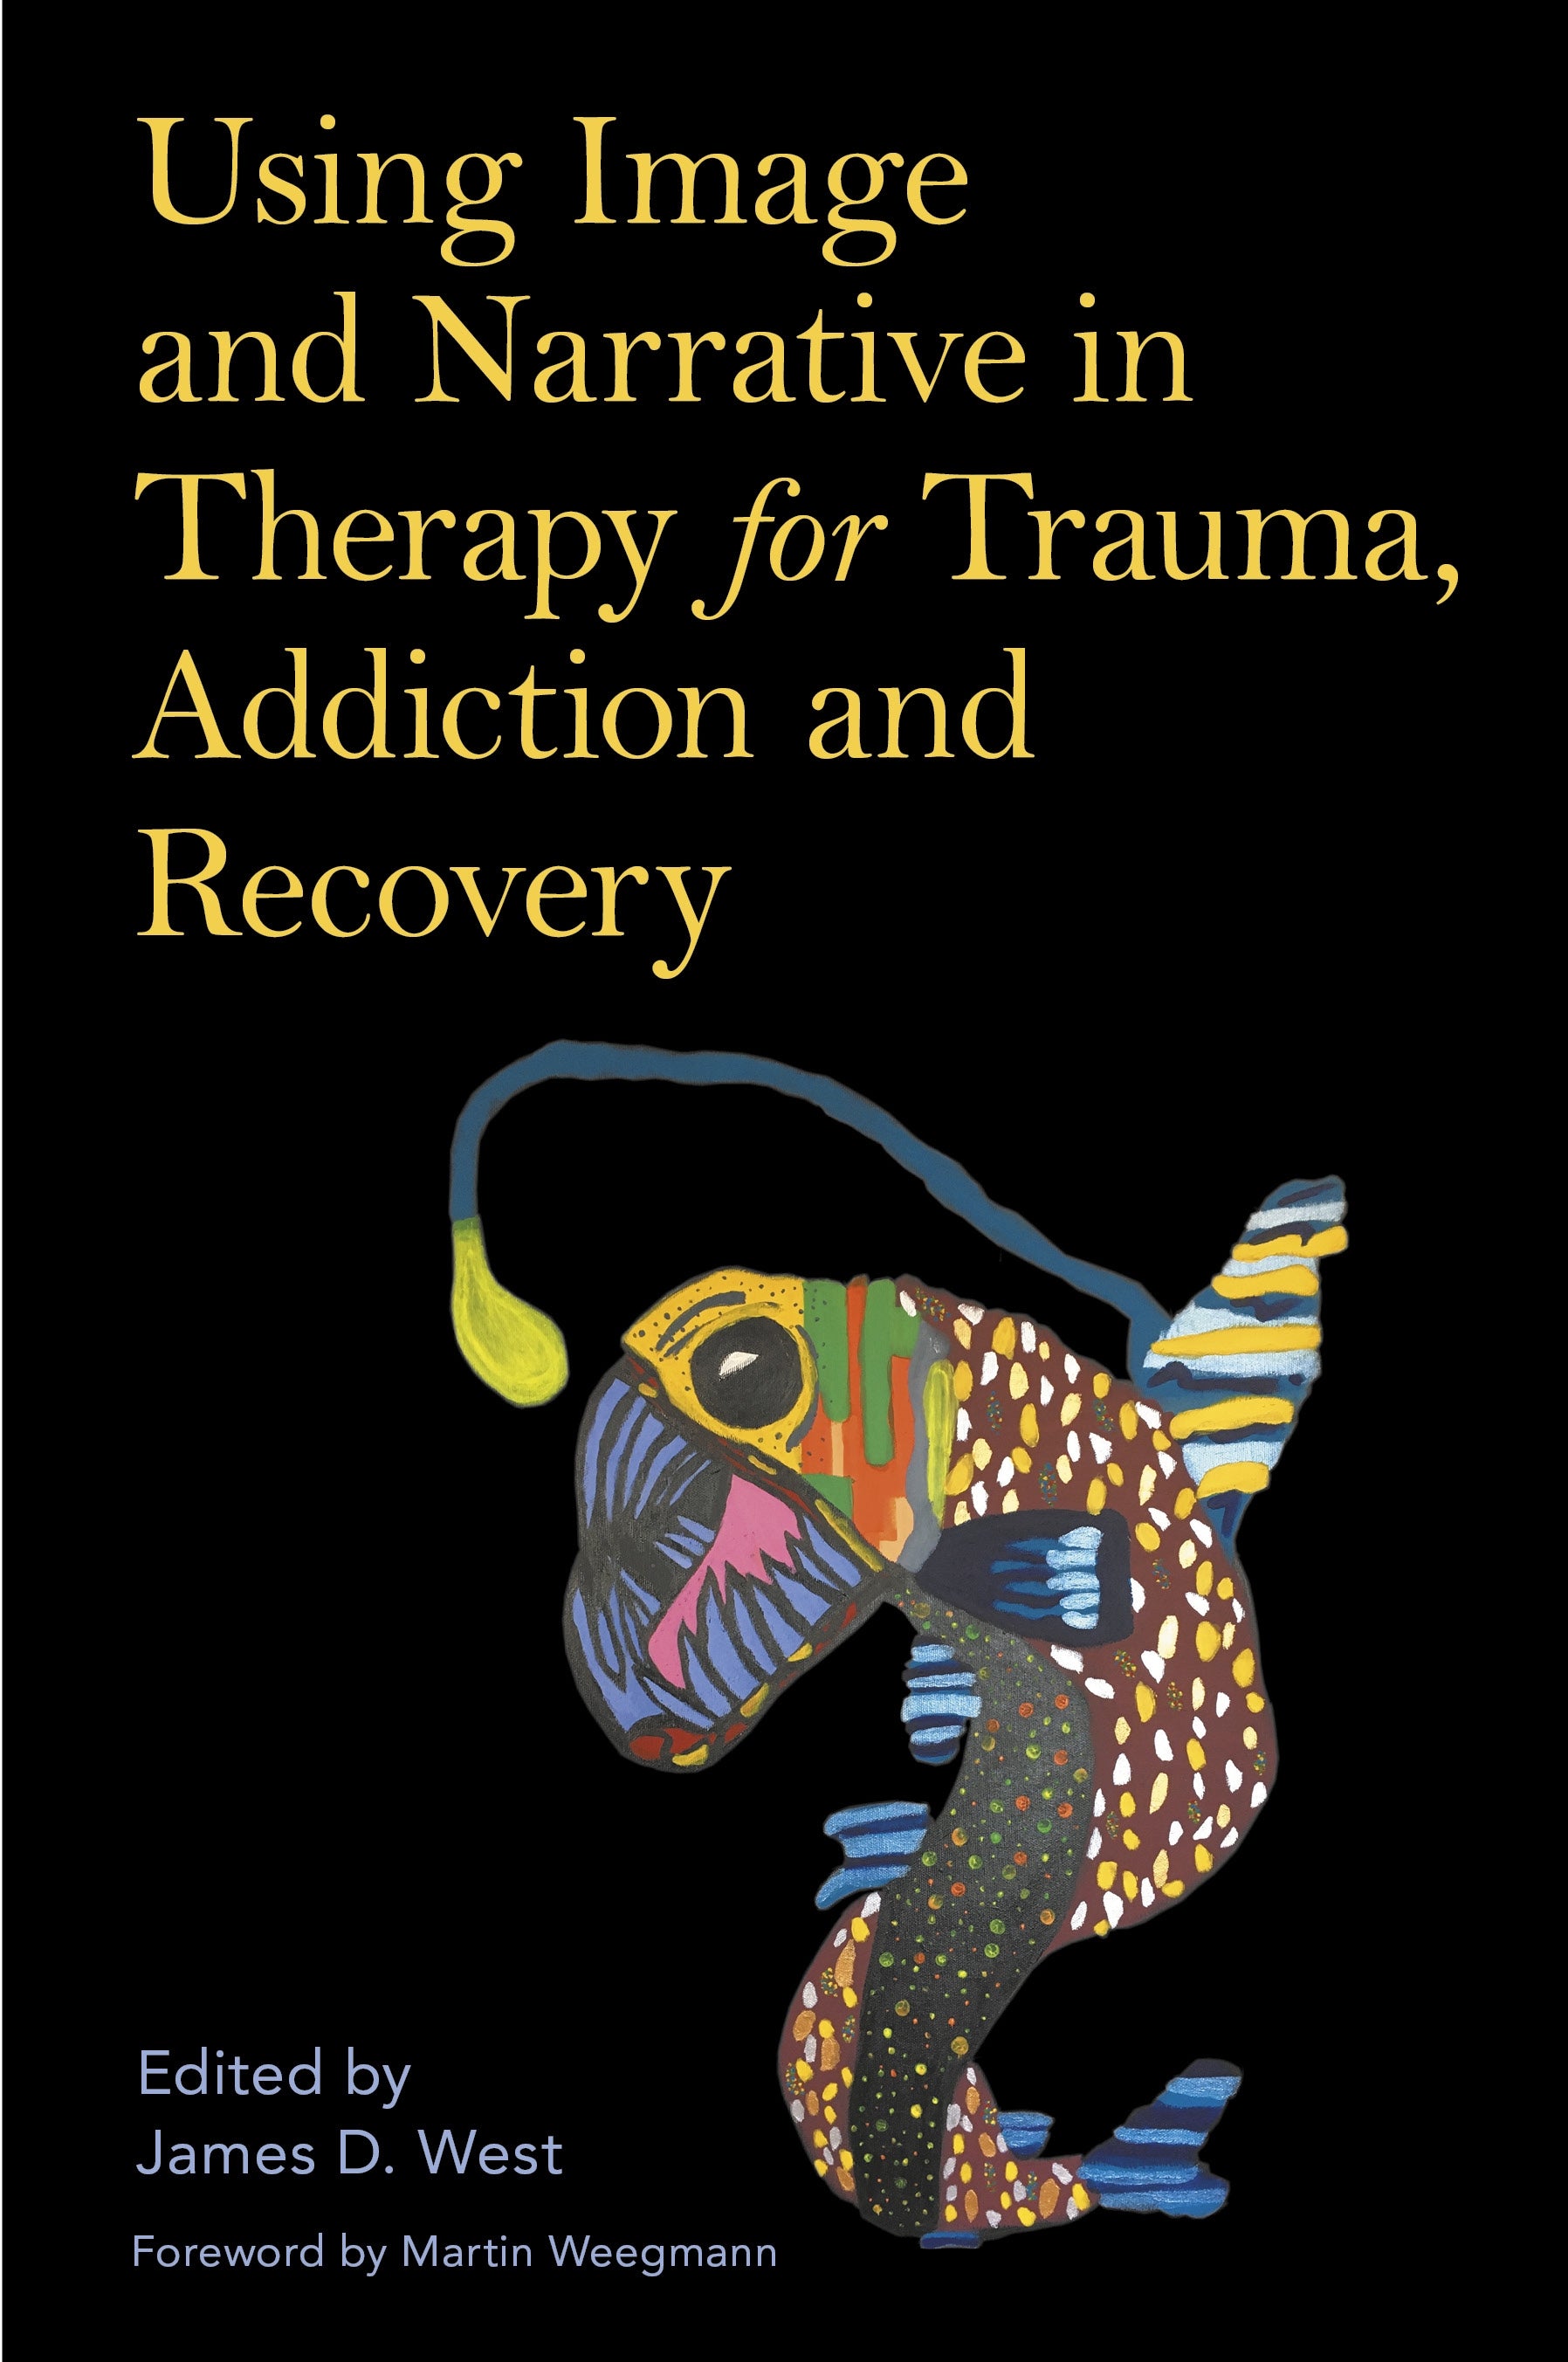 Using Image and Narrative in Therapy for Trauma, Addiction and Recovery by James West, No Author Listed, Martin Weegmann